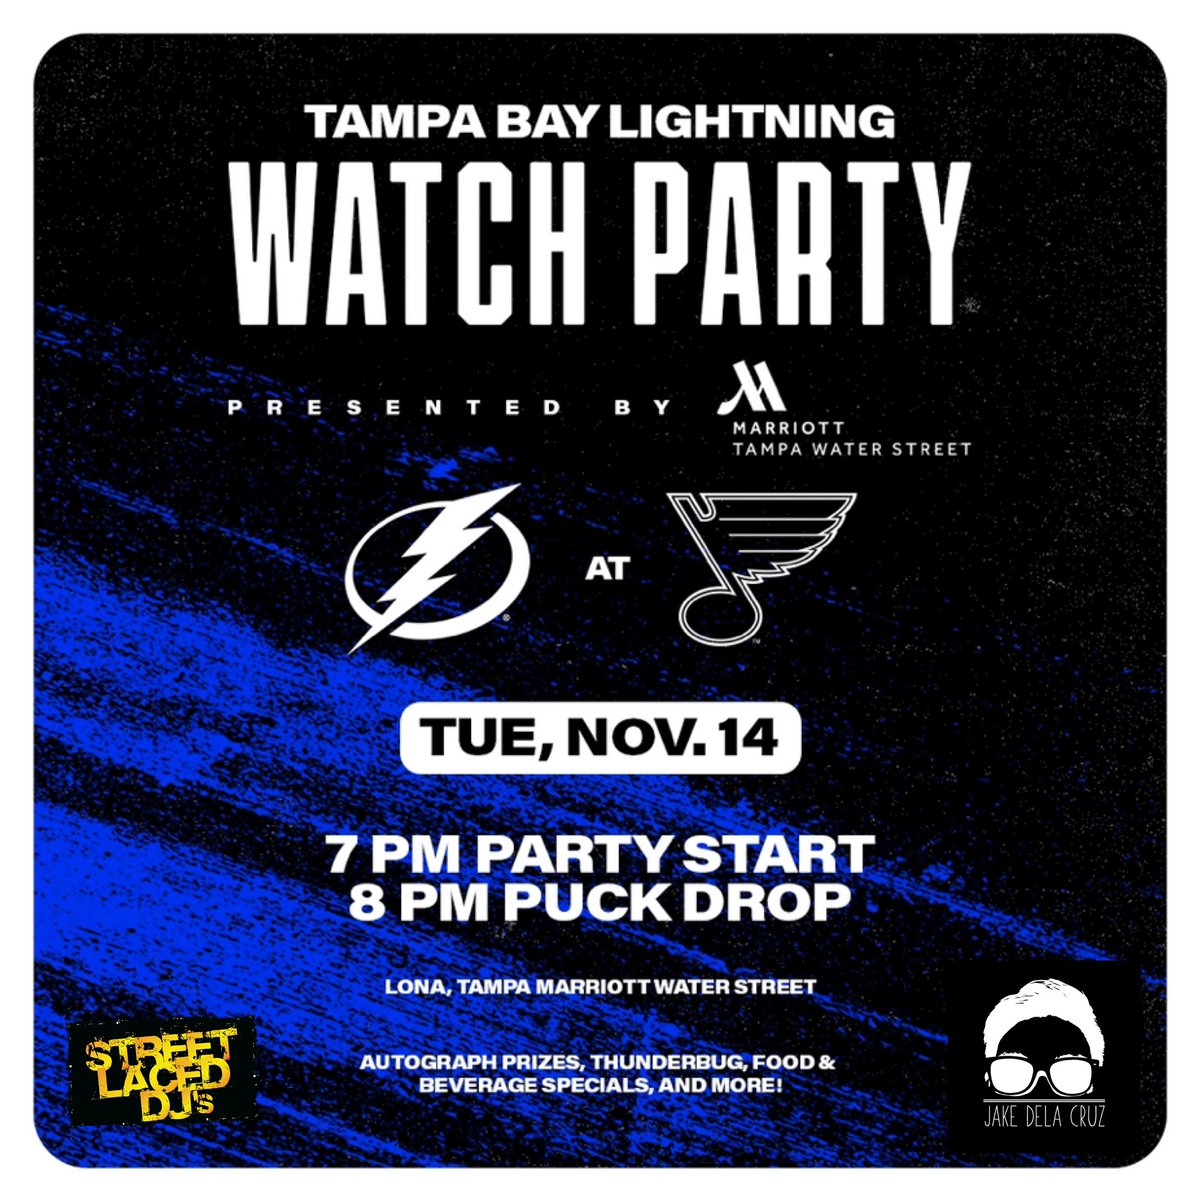 #BoltsNation! Join ME, @StreetLacedDJs own @DJJakeDelaCruz, @ThunderBugTBL, @TBLRollingTHNDR & #BoltsBlueCrew TONIGHT at Lona (Tampa Marriott @WaterStTampa) for the OFFICIAL @TBLightning Watch Party! 
Party starts at 7p! 
WIN autographed prizes & @933flz Jingle Ball tix! #GoBolts